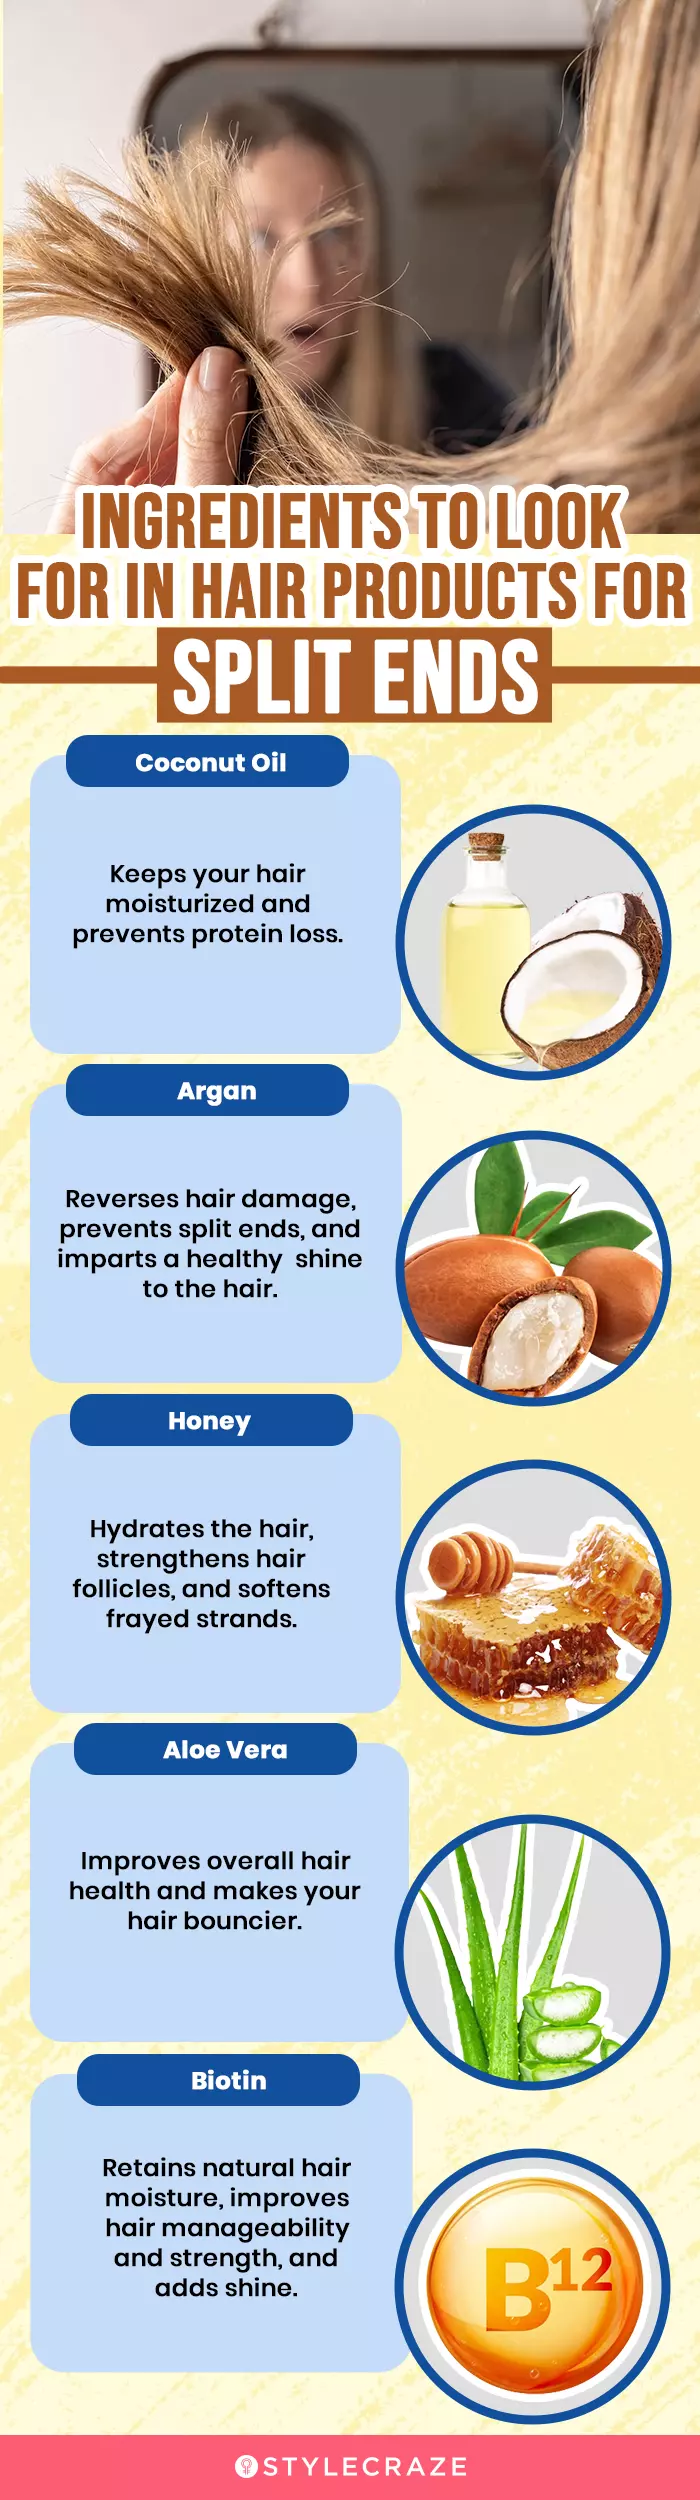 Ingredients To Look For To Repair Split Ends (infographic)